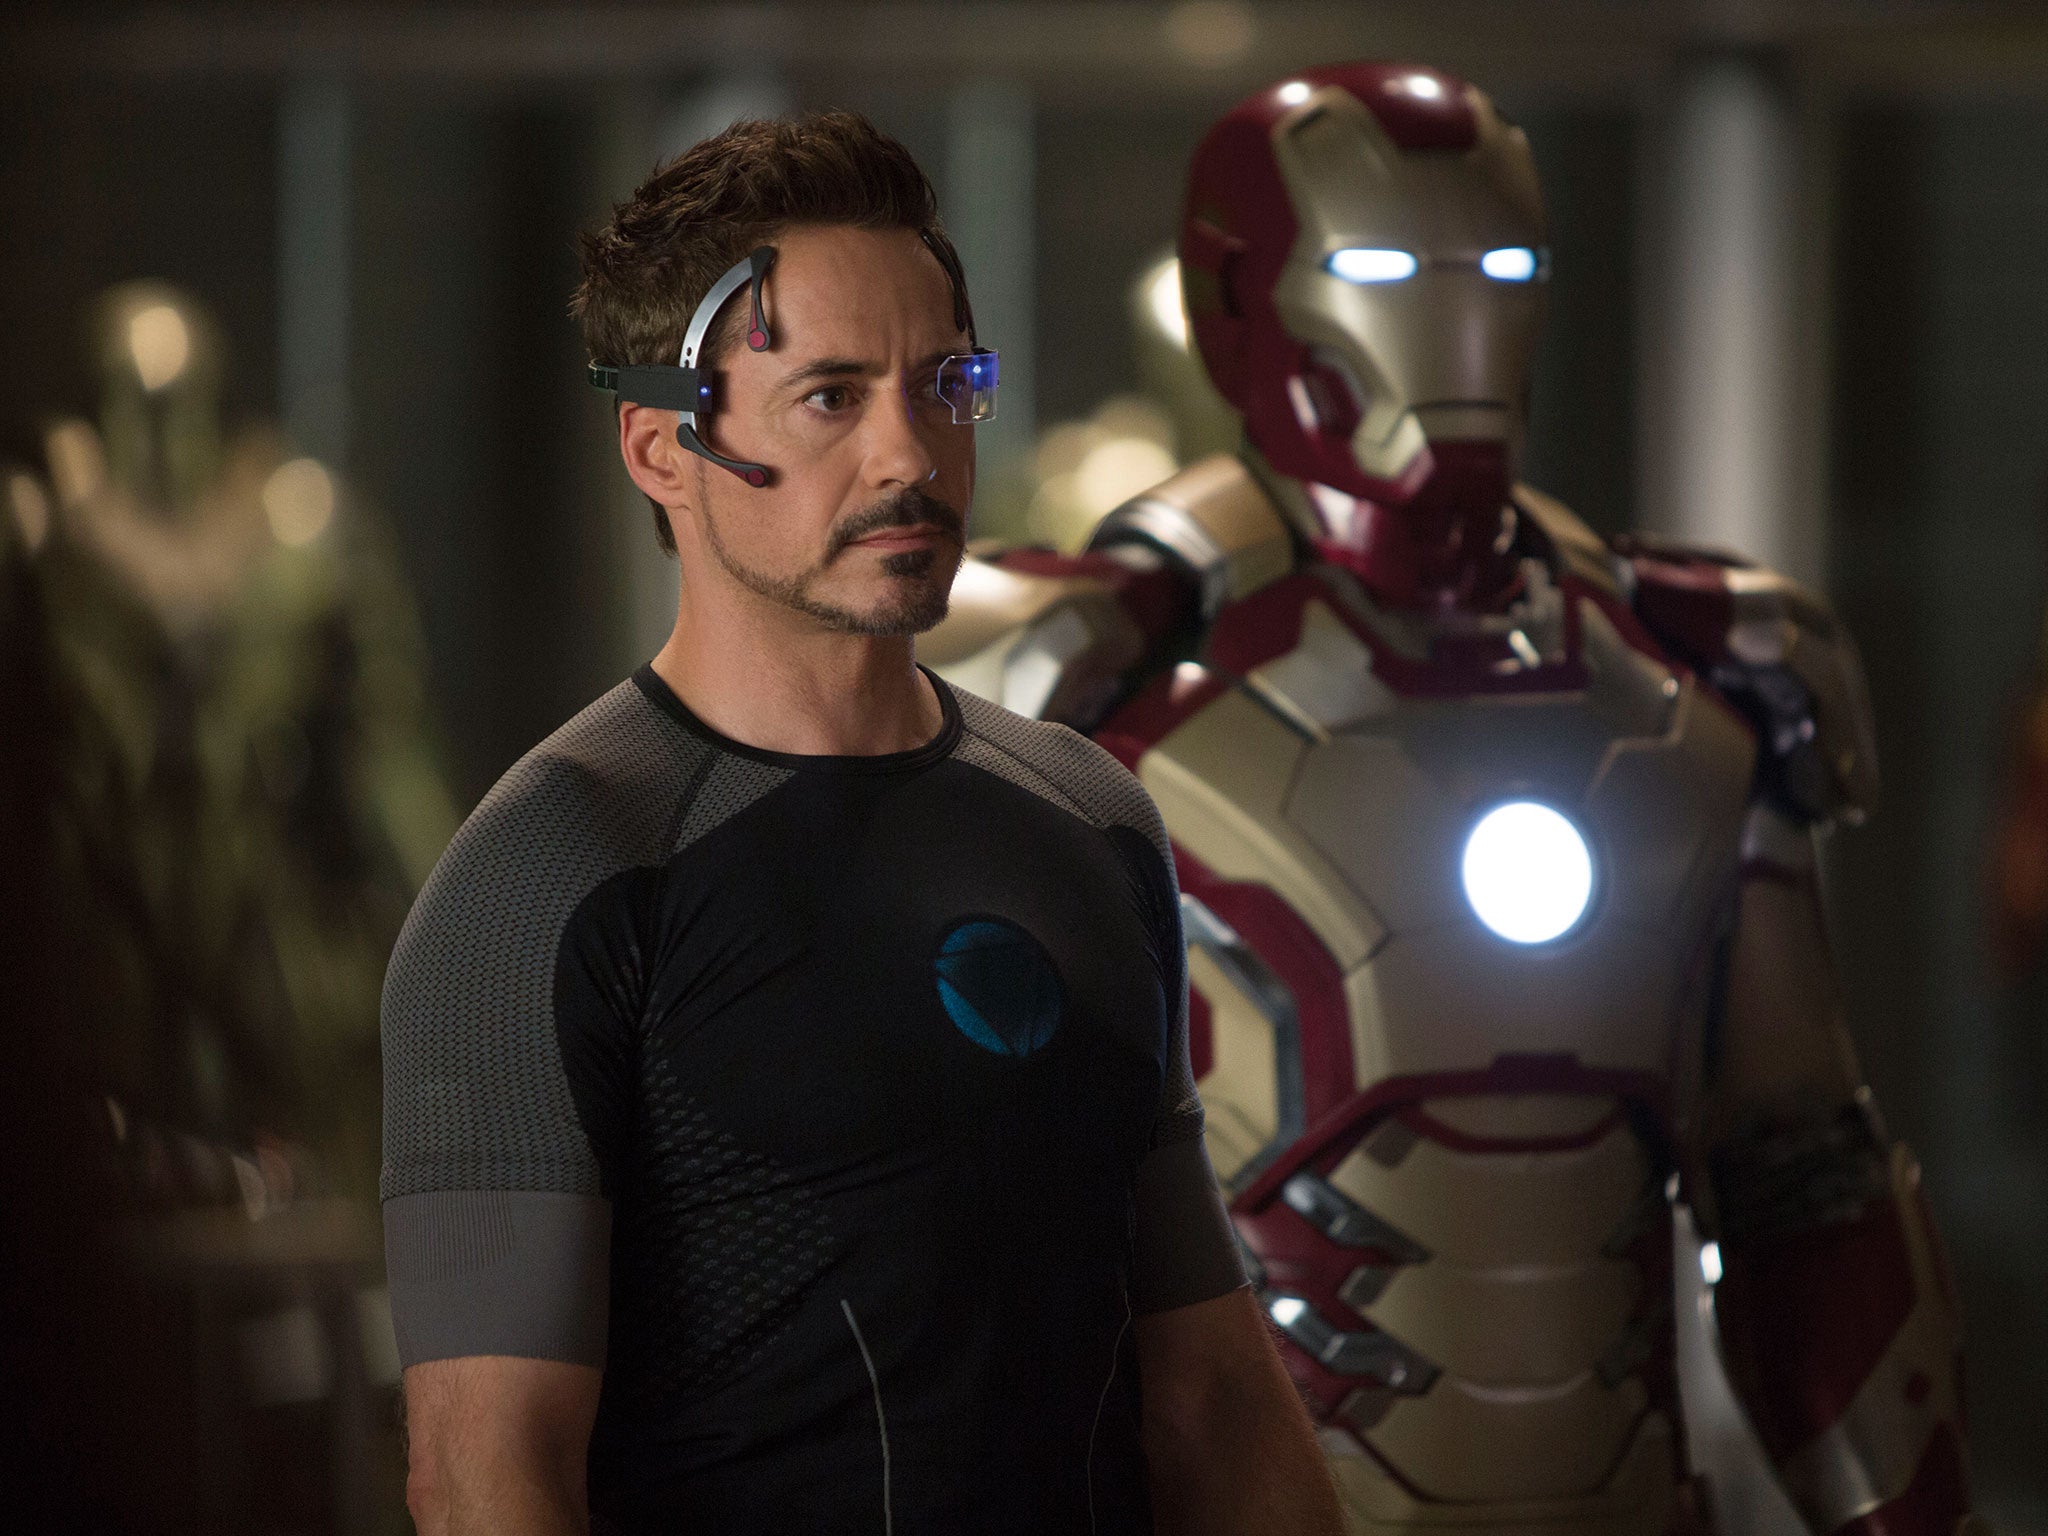 Robert Downey Jr in ‘Iron Man 3’. The superhero has data sent to his field of vision